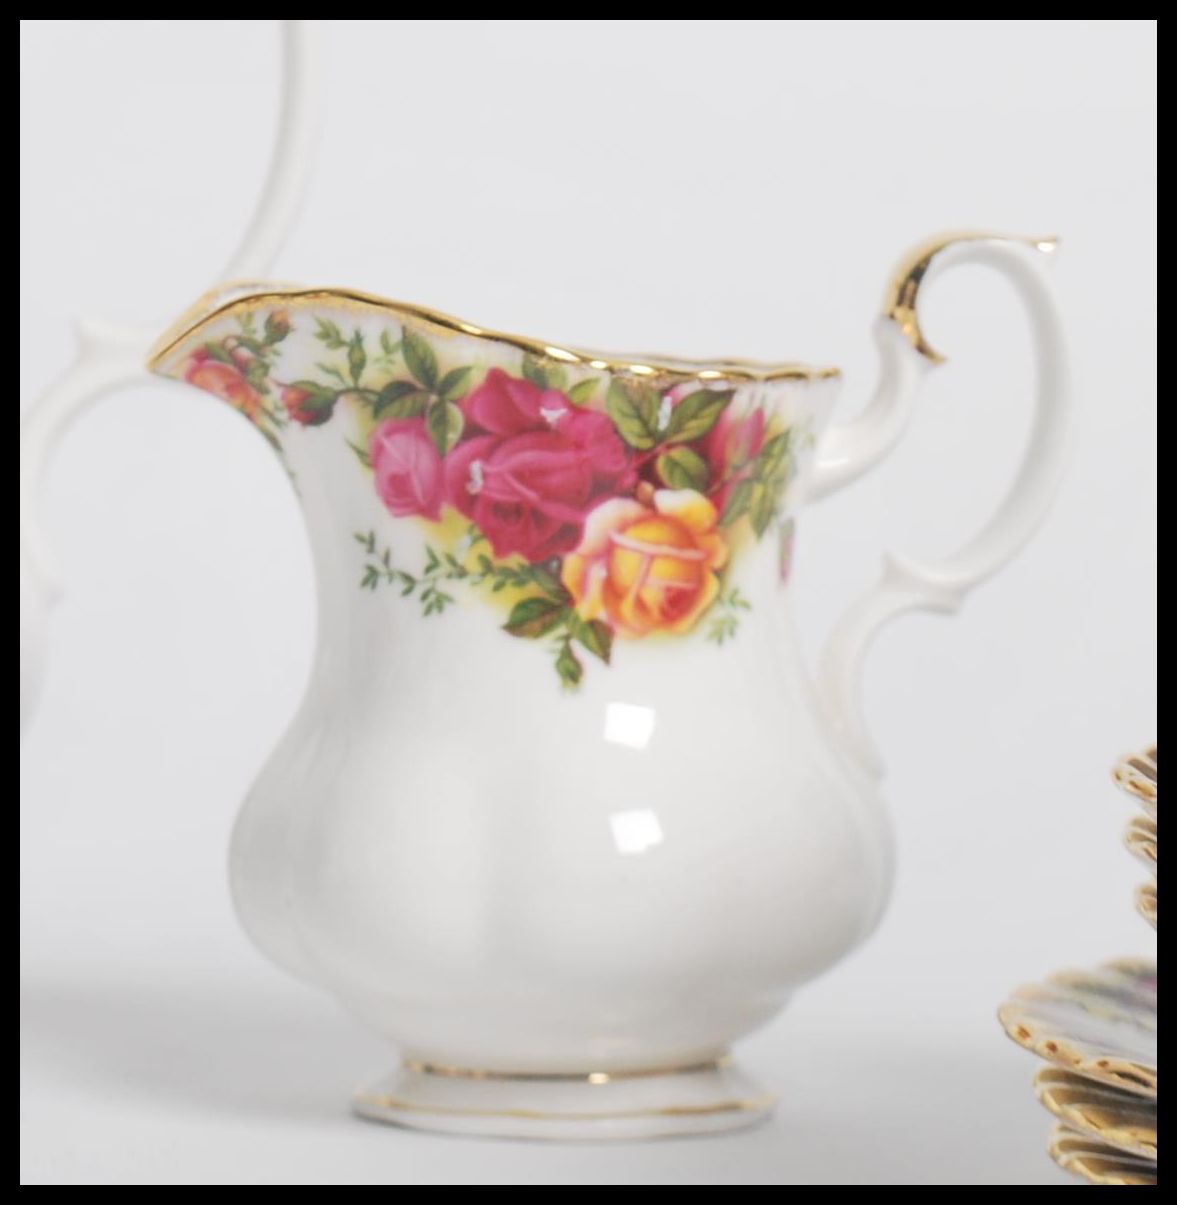 A vintage 20th century Royal Albert Old Country Ro - Image 3 of 8